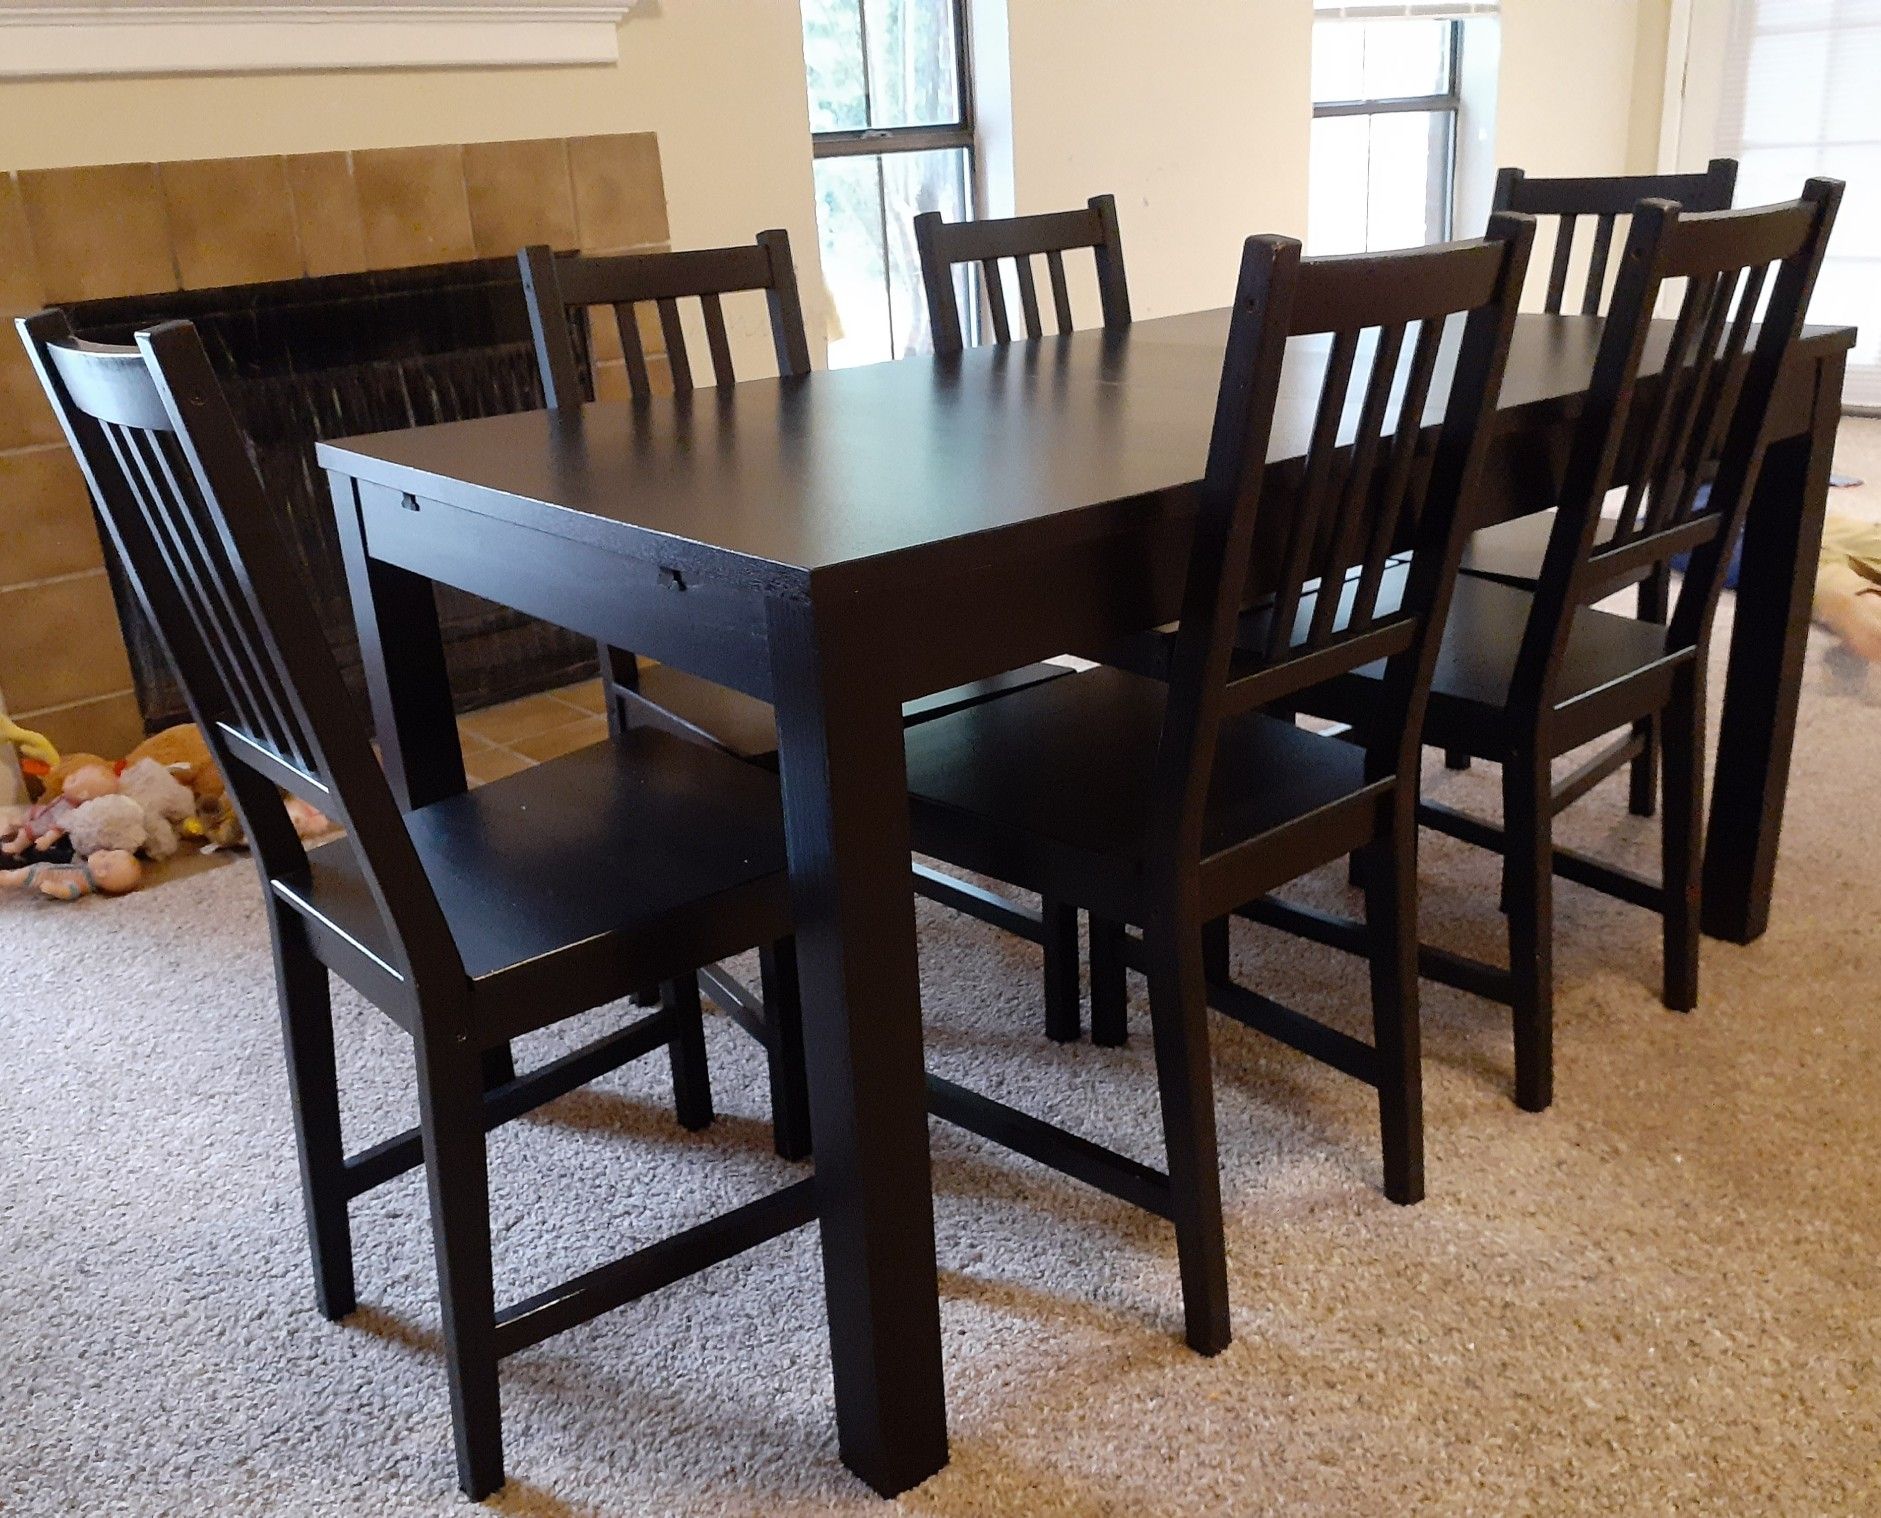 IKEA Bjursta extendable Black dining table with 6 chairs